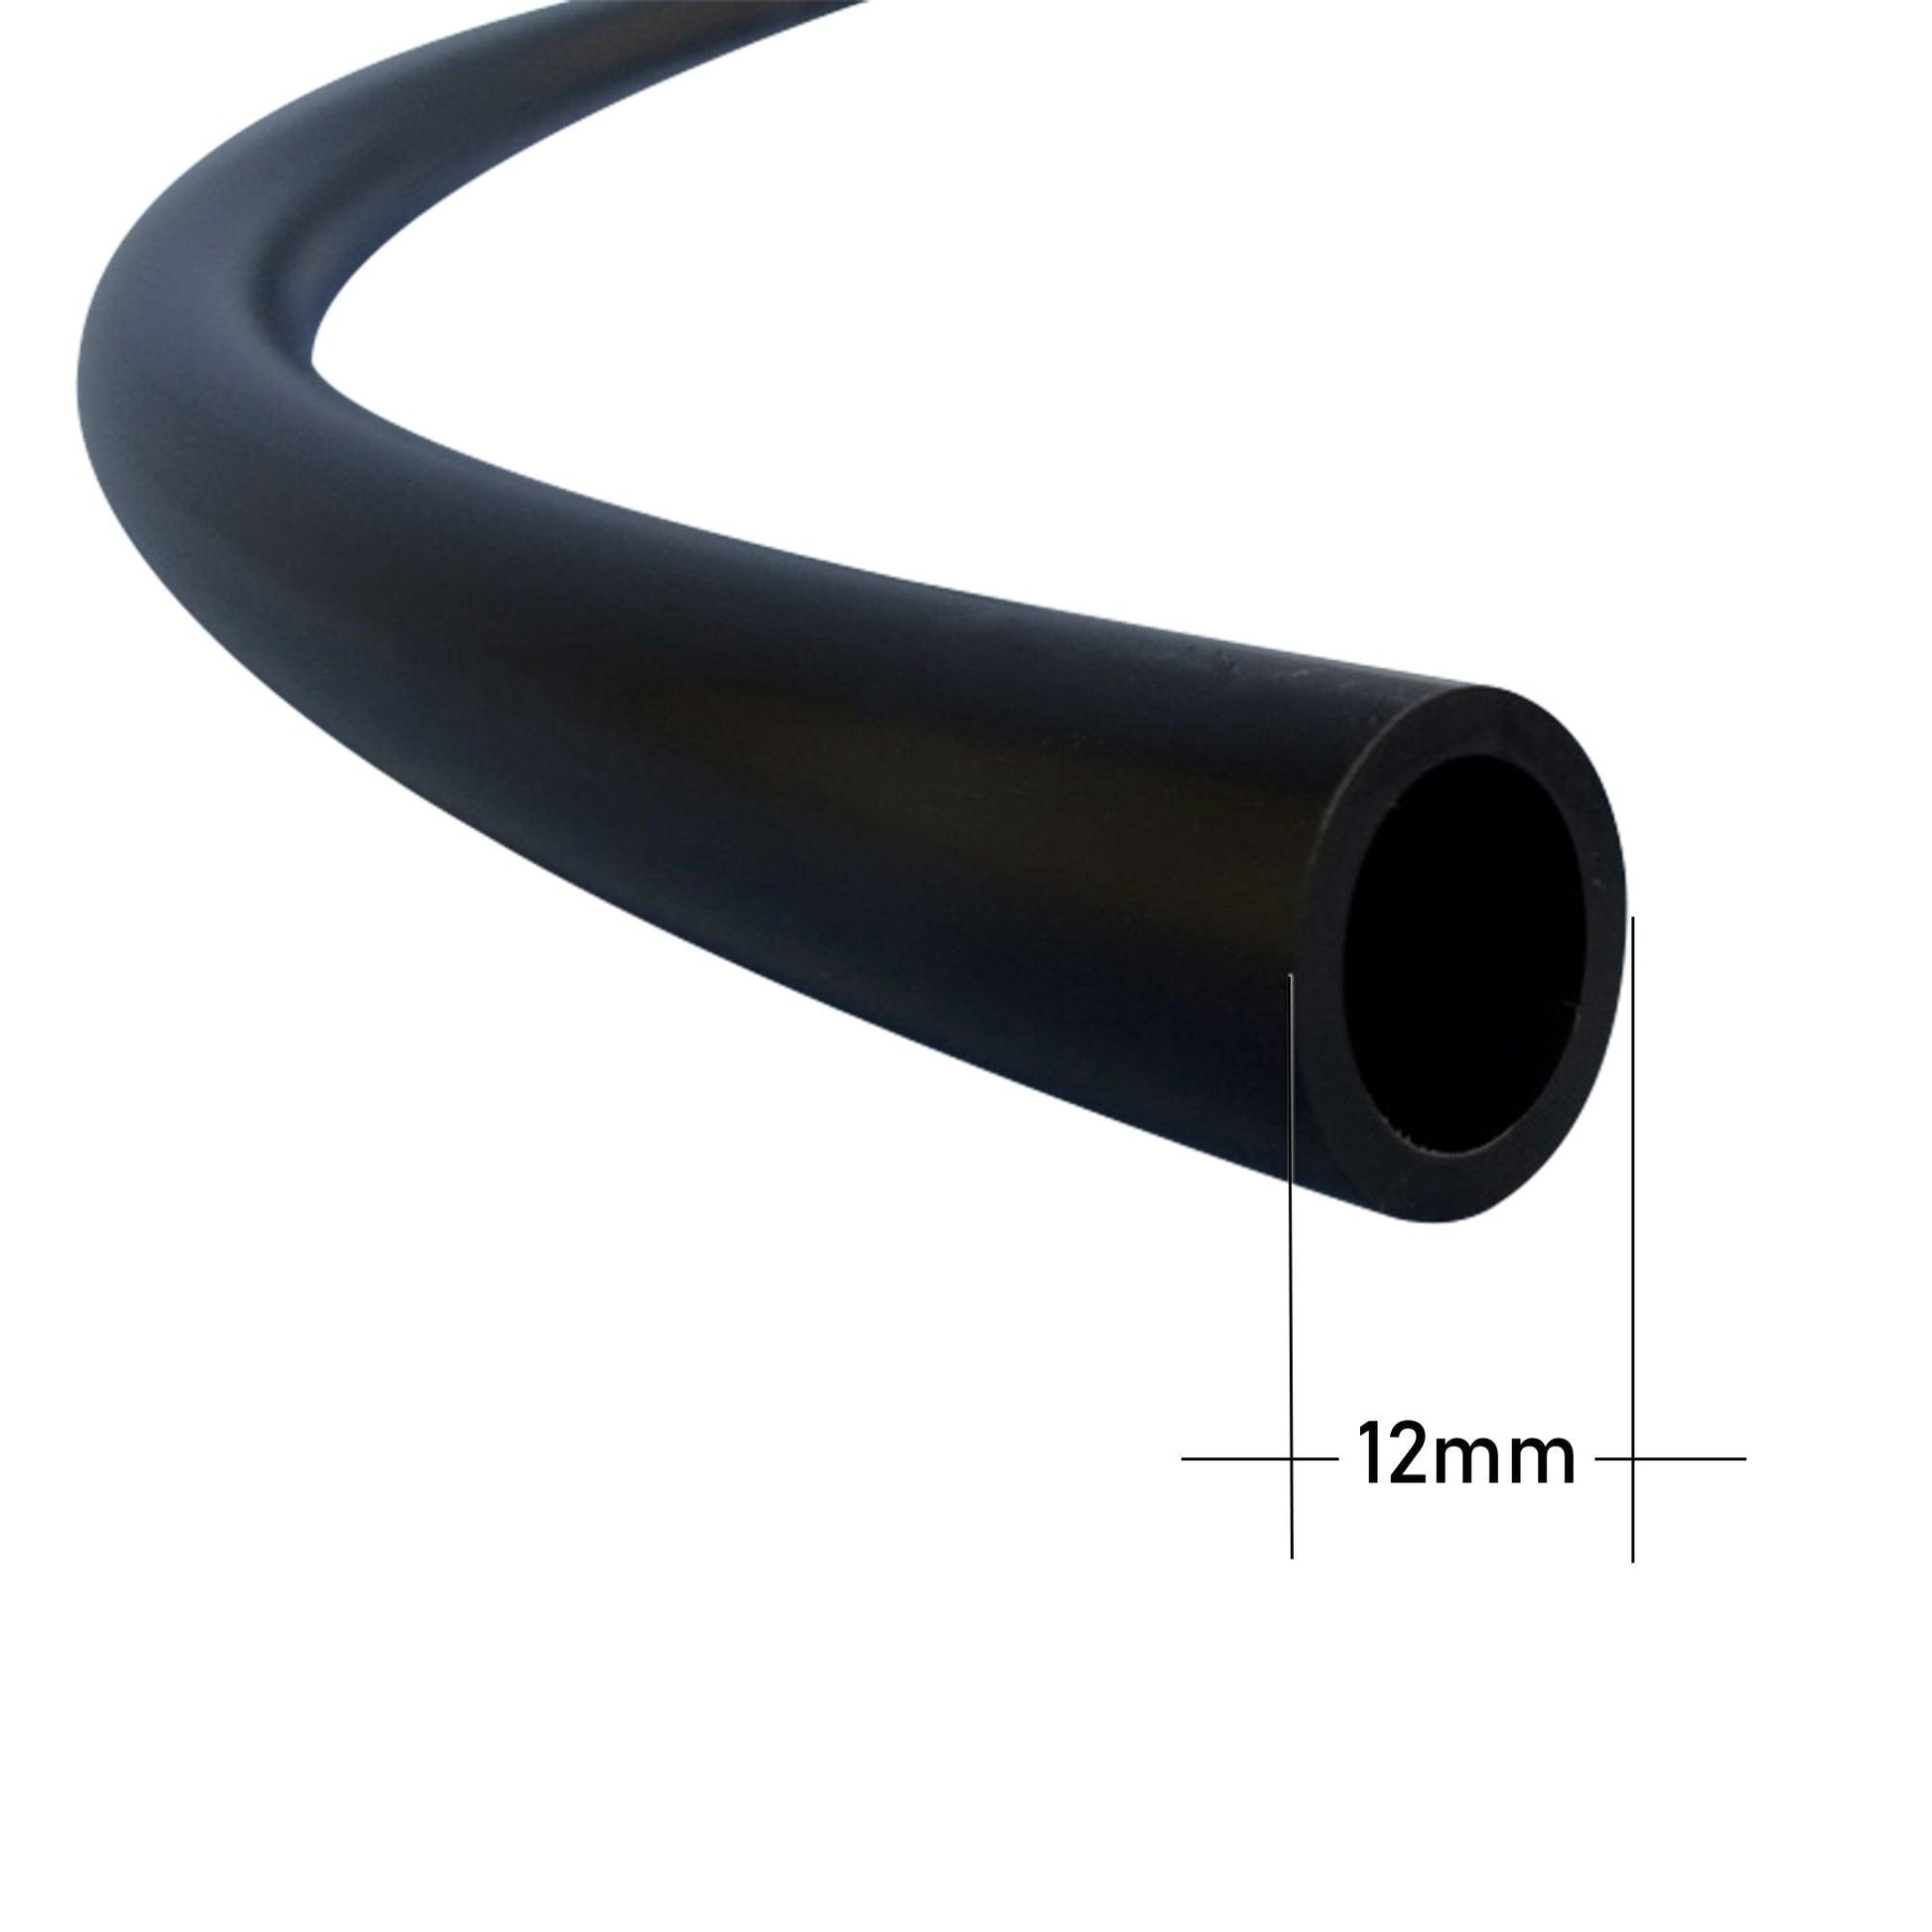 JOHN GUEST 12mm Black Tube - Caravan & RV Water Plumbing Pipe | 10m Coil - free Delivery - Cams Cords